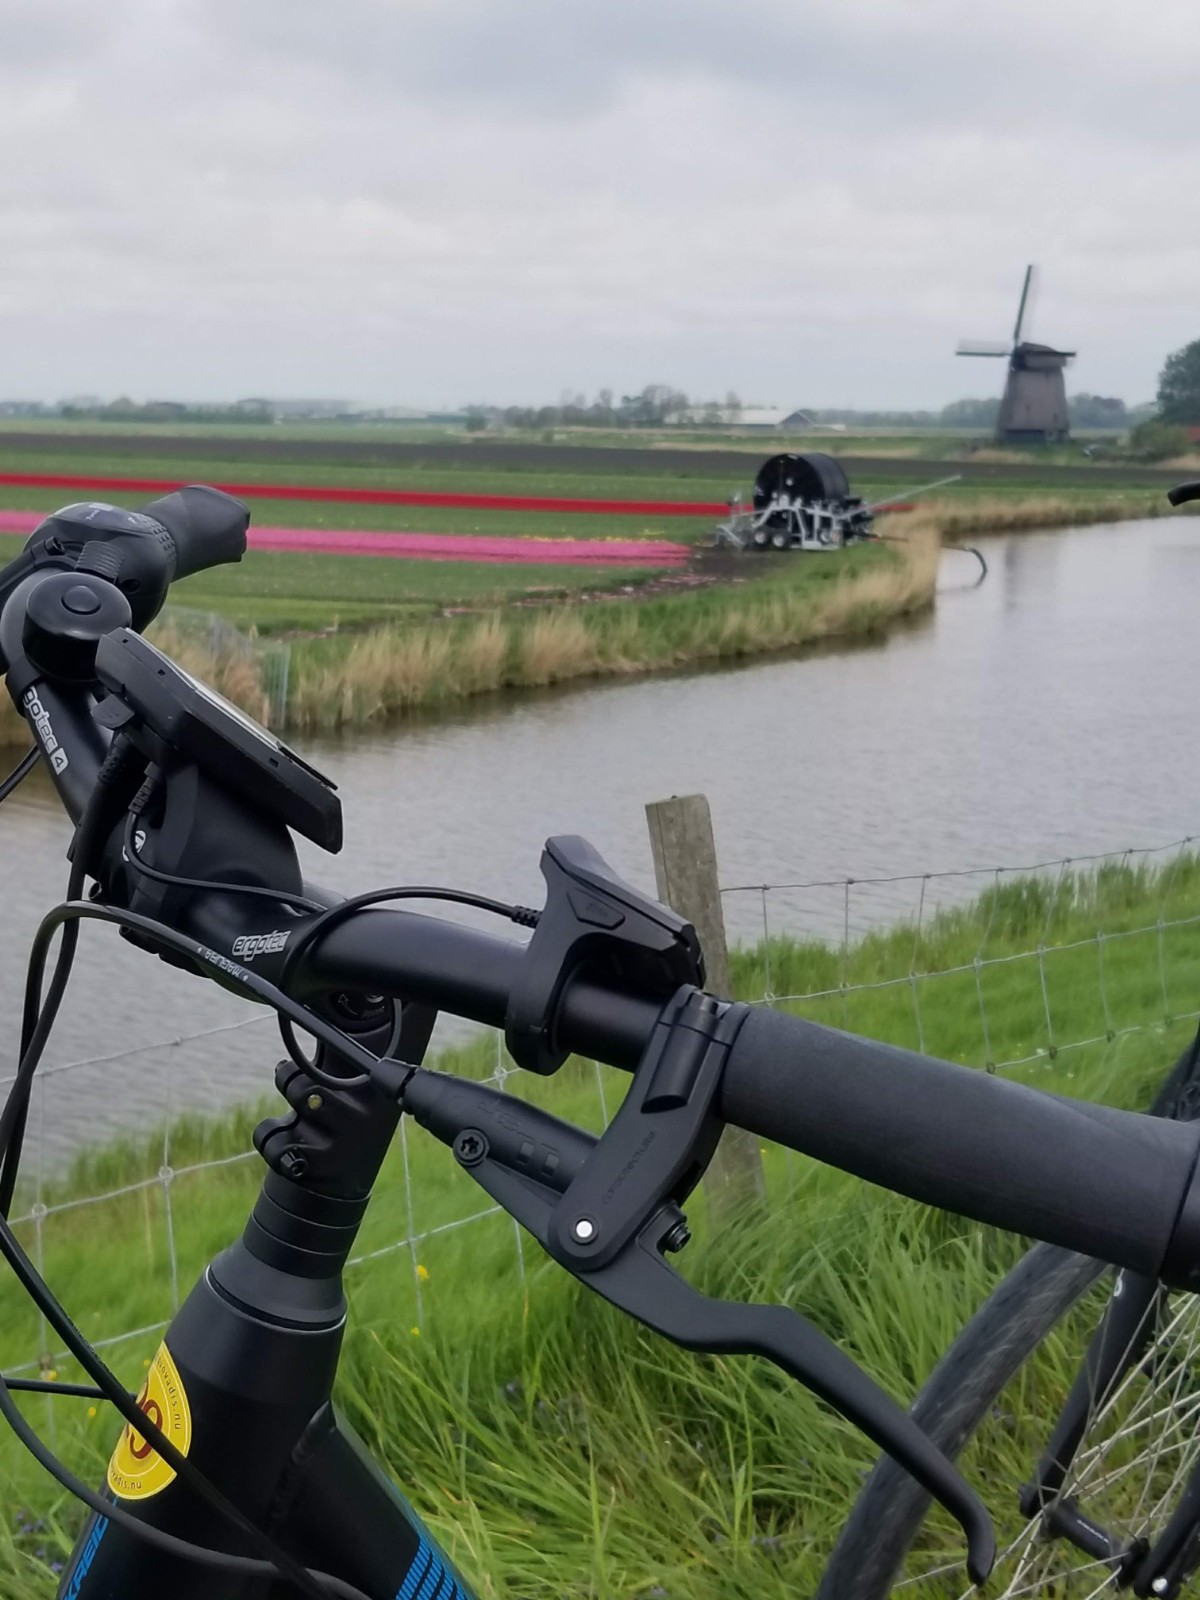 Bikes, tulips, canals, and windmills. What four things do you get on a Bike & Barge trip to The Netherlands?